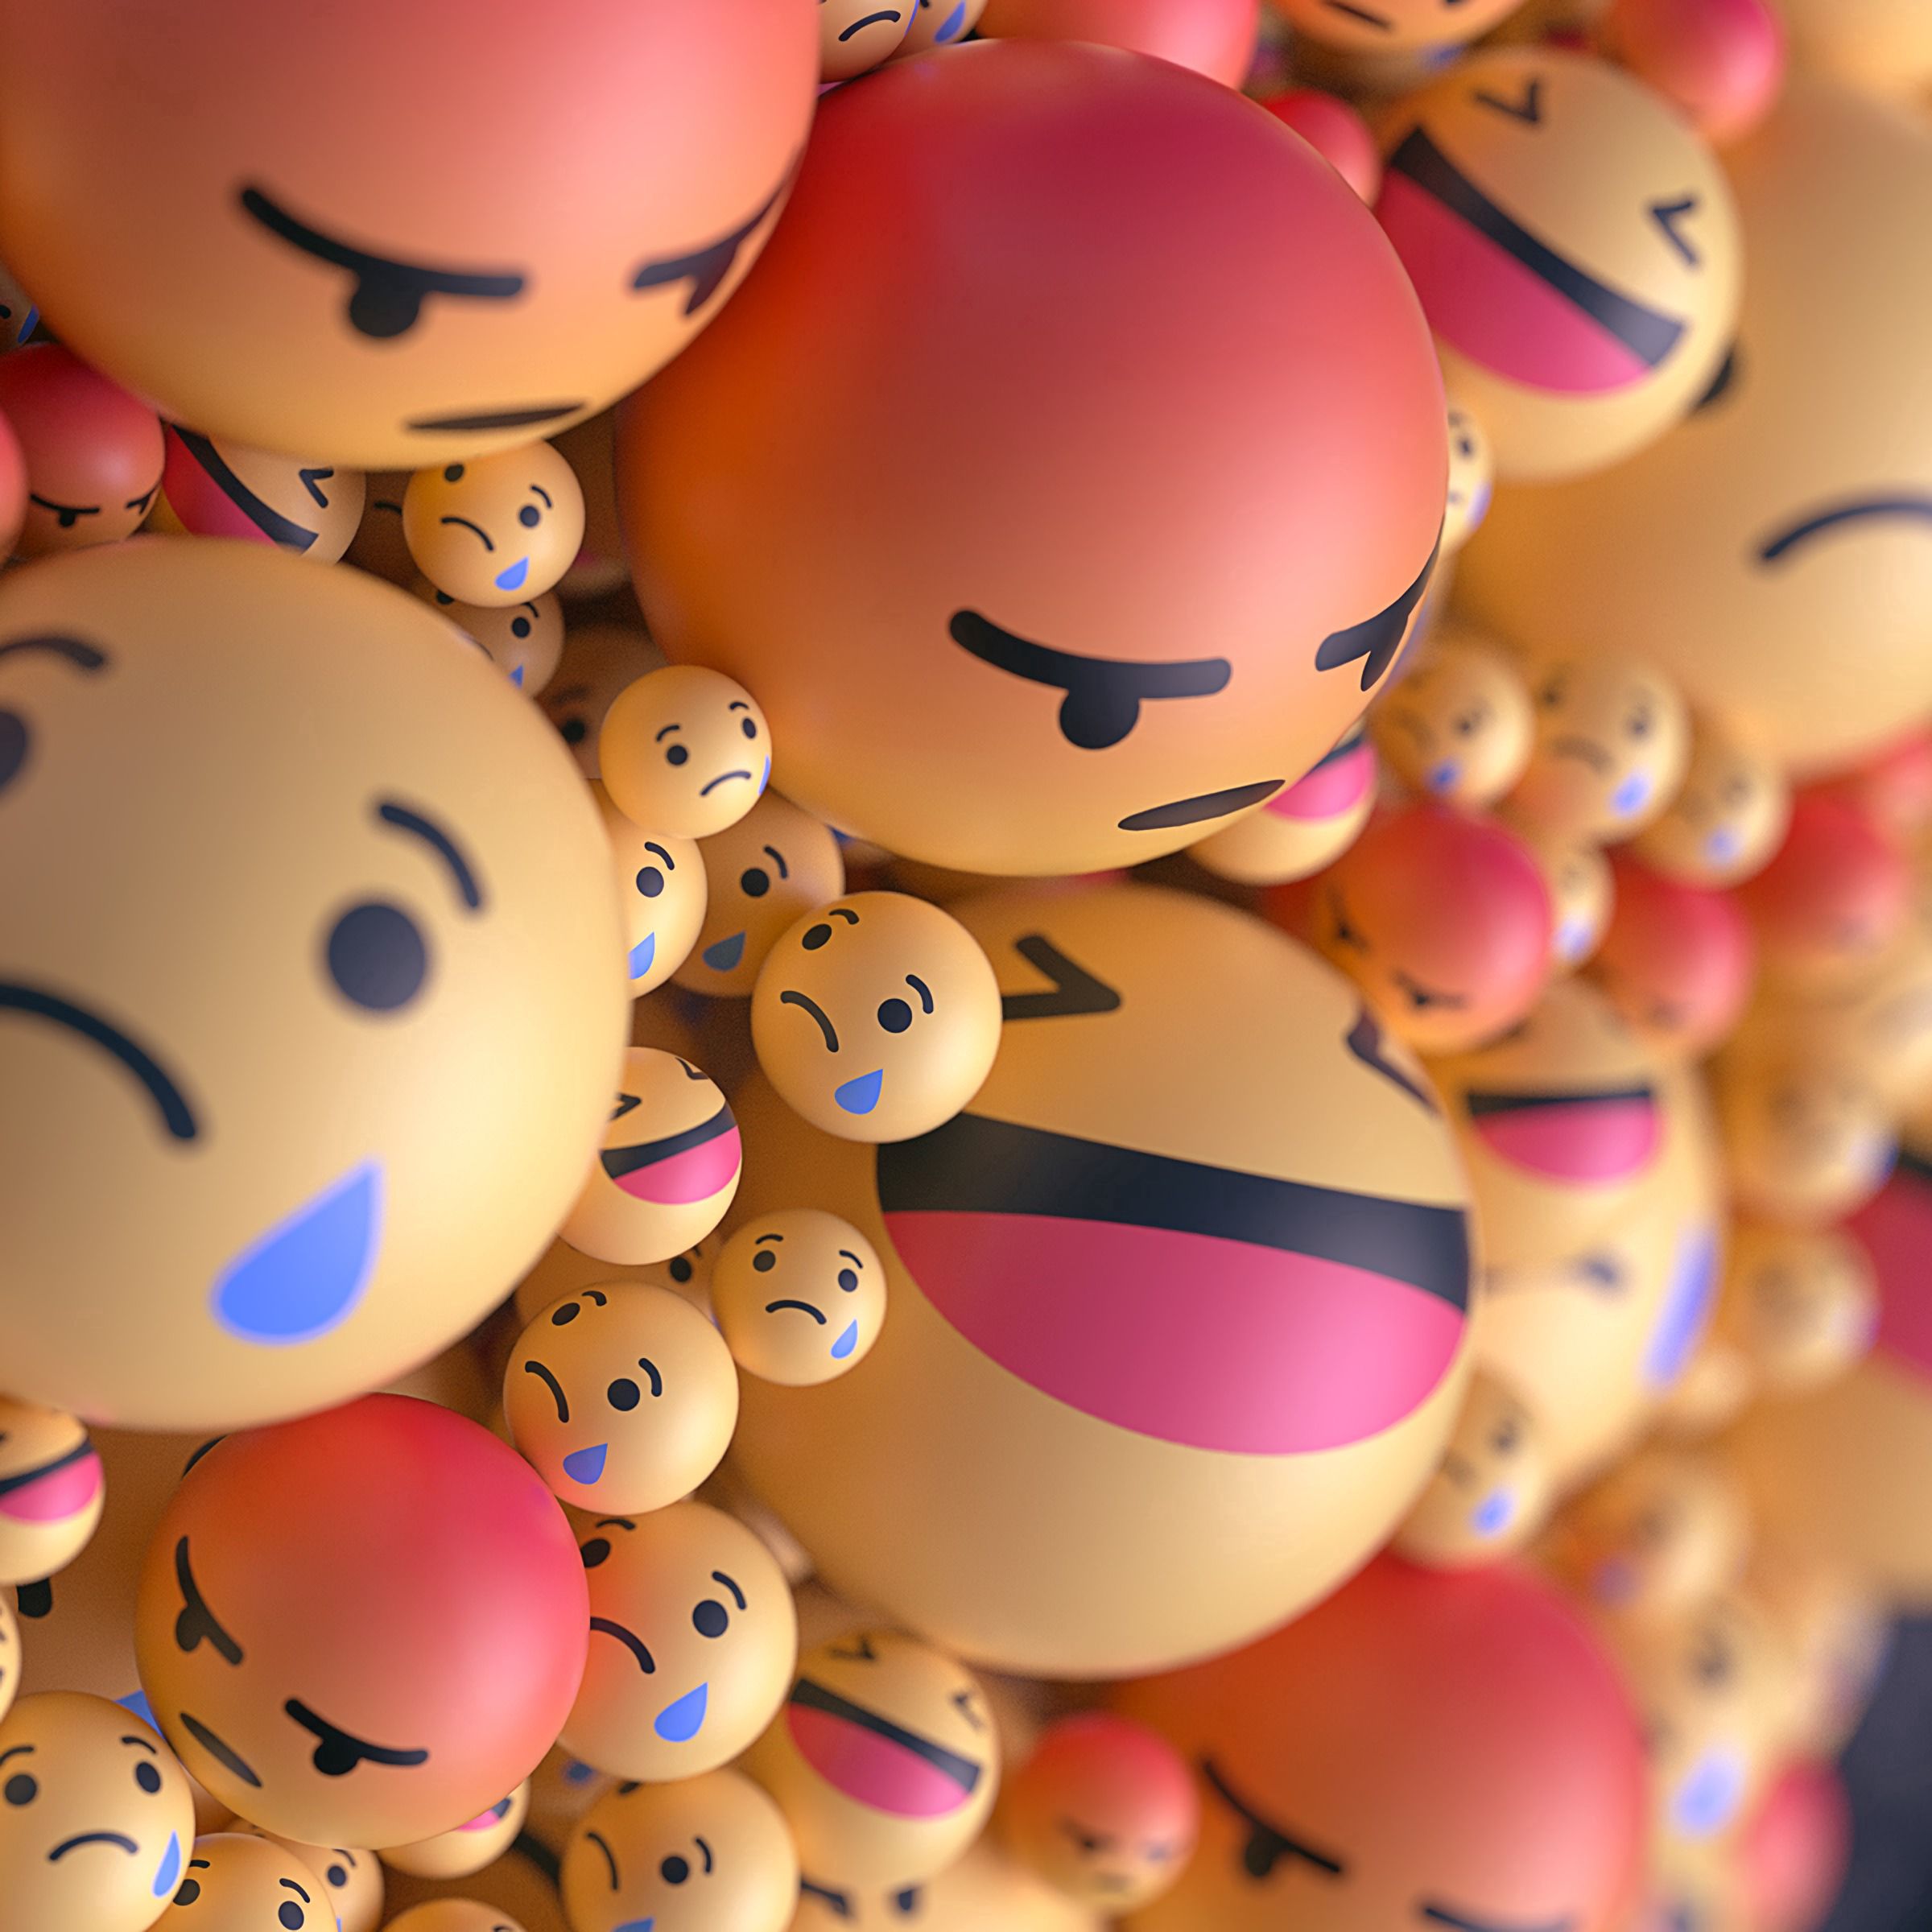 HD wallpaper 3d, emoticons, smiles, balloons, taw, smilies, smileys, emotions